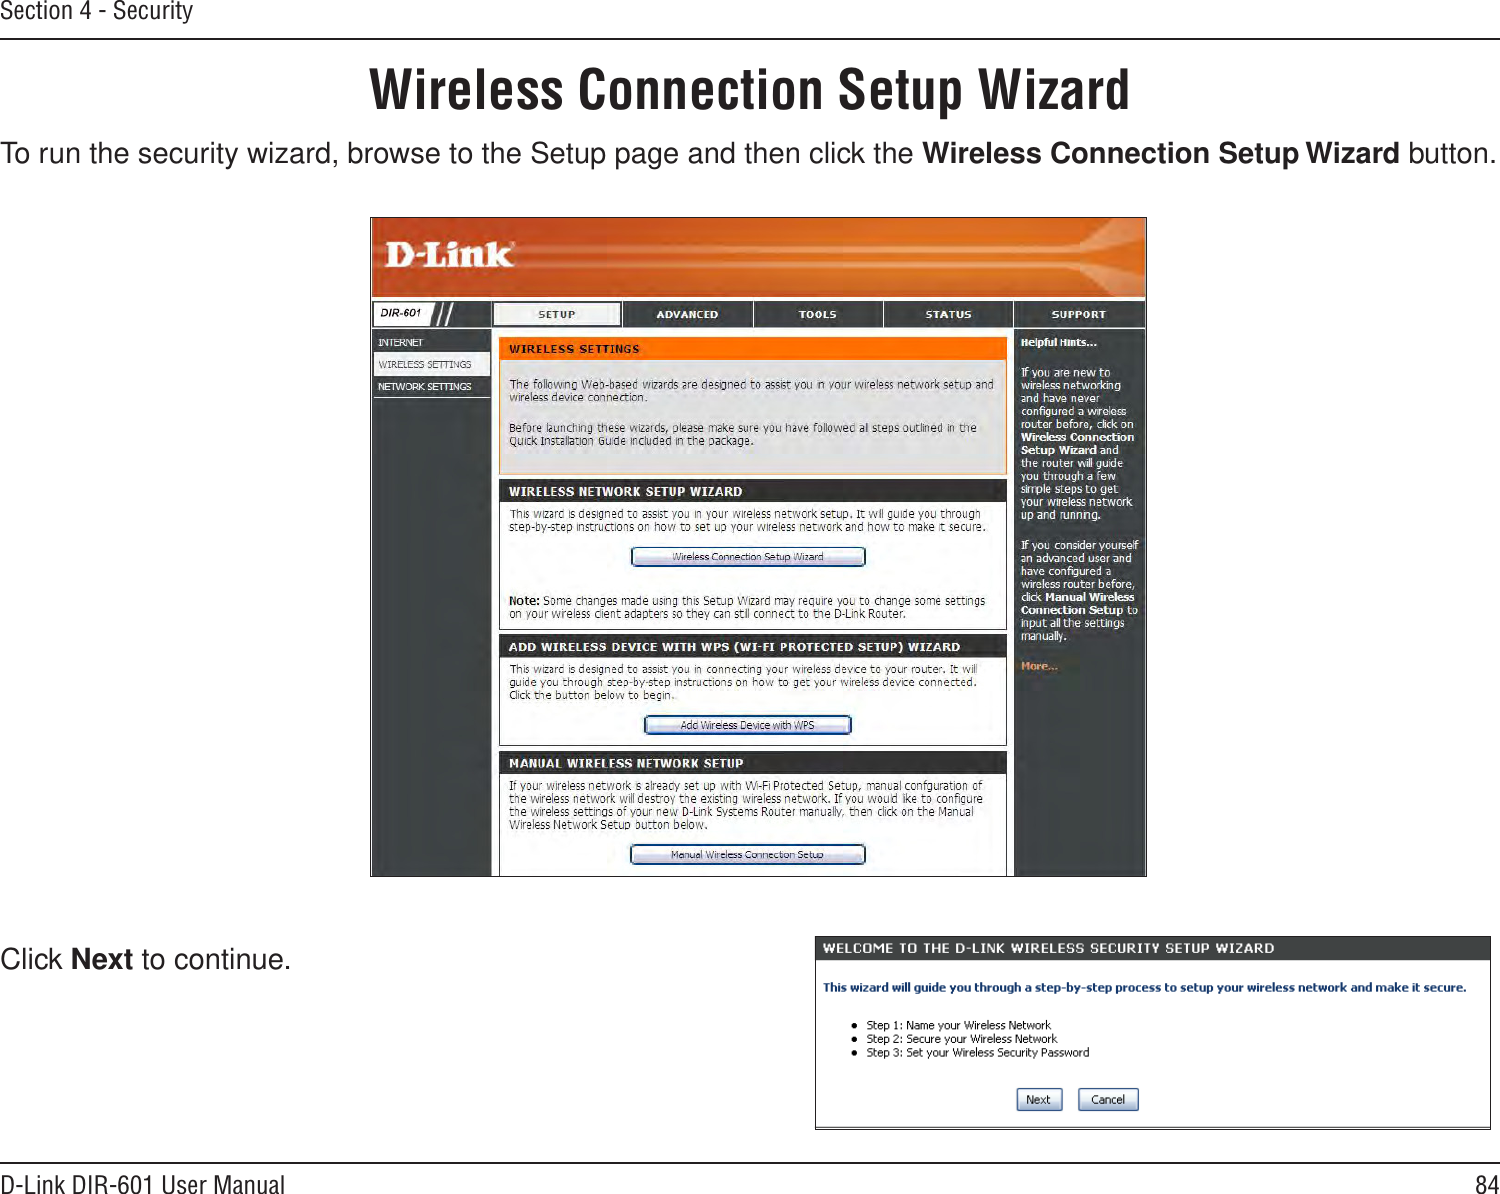 84D-Link DIR-601 User ManualSection 4 - SecurityWireless Connection Setup WizardTo run the security wizard, browse to the Setup page and then click the Wireless Connection Setup Wizard button. Click Next to continue.